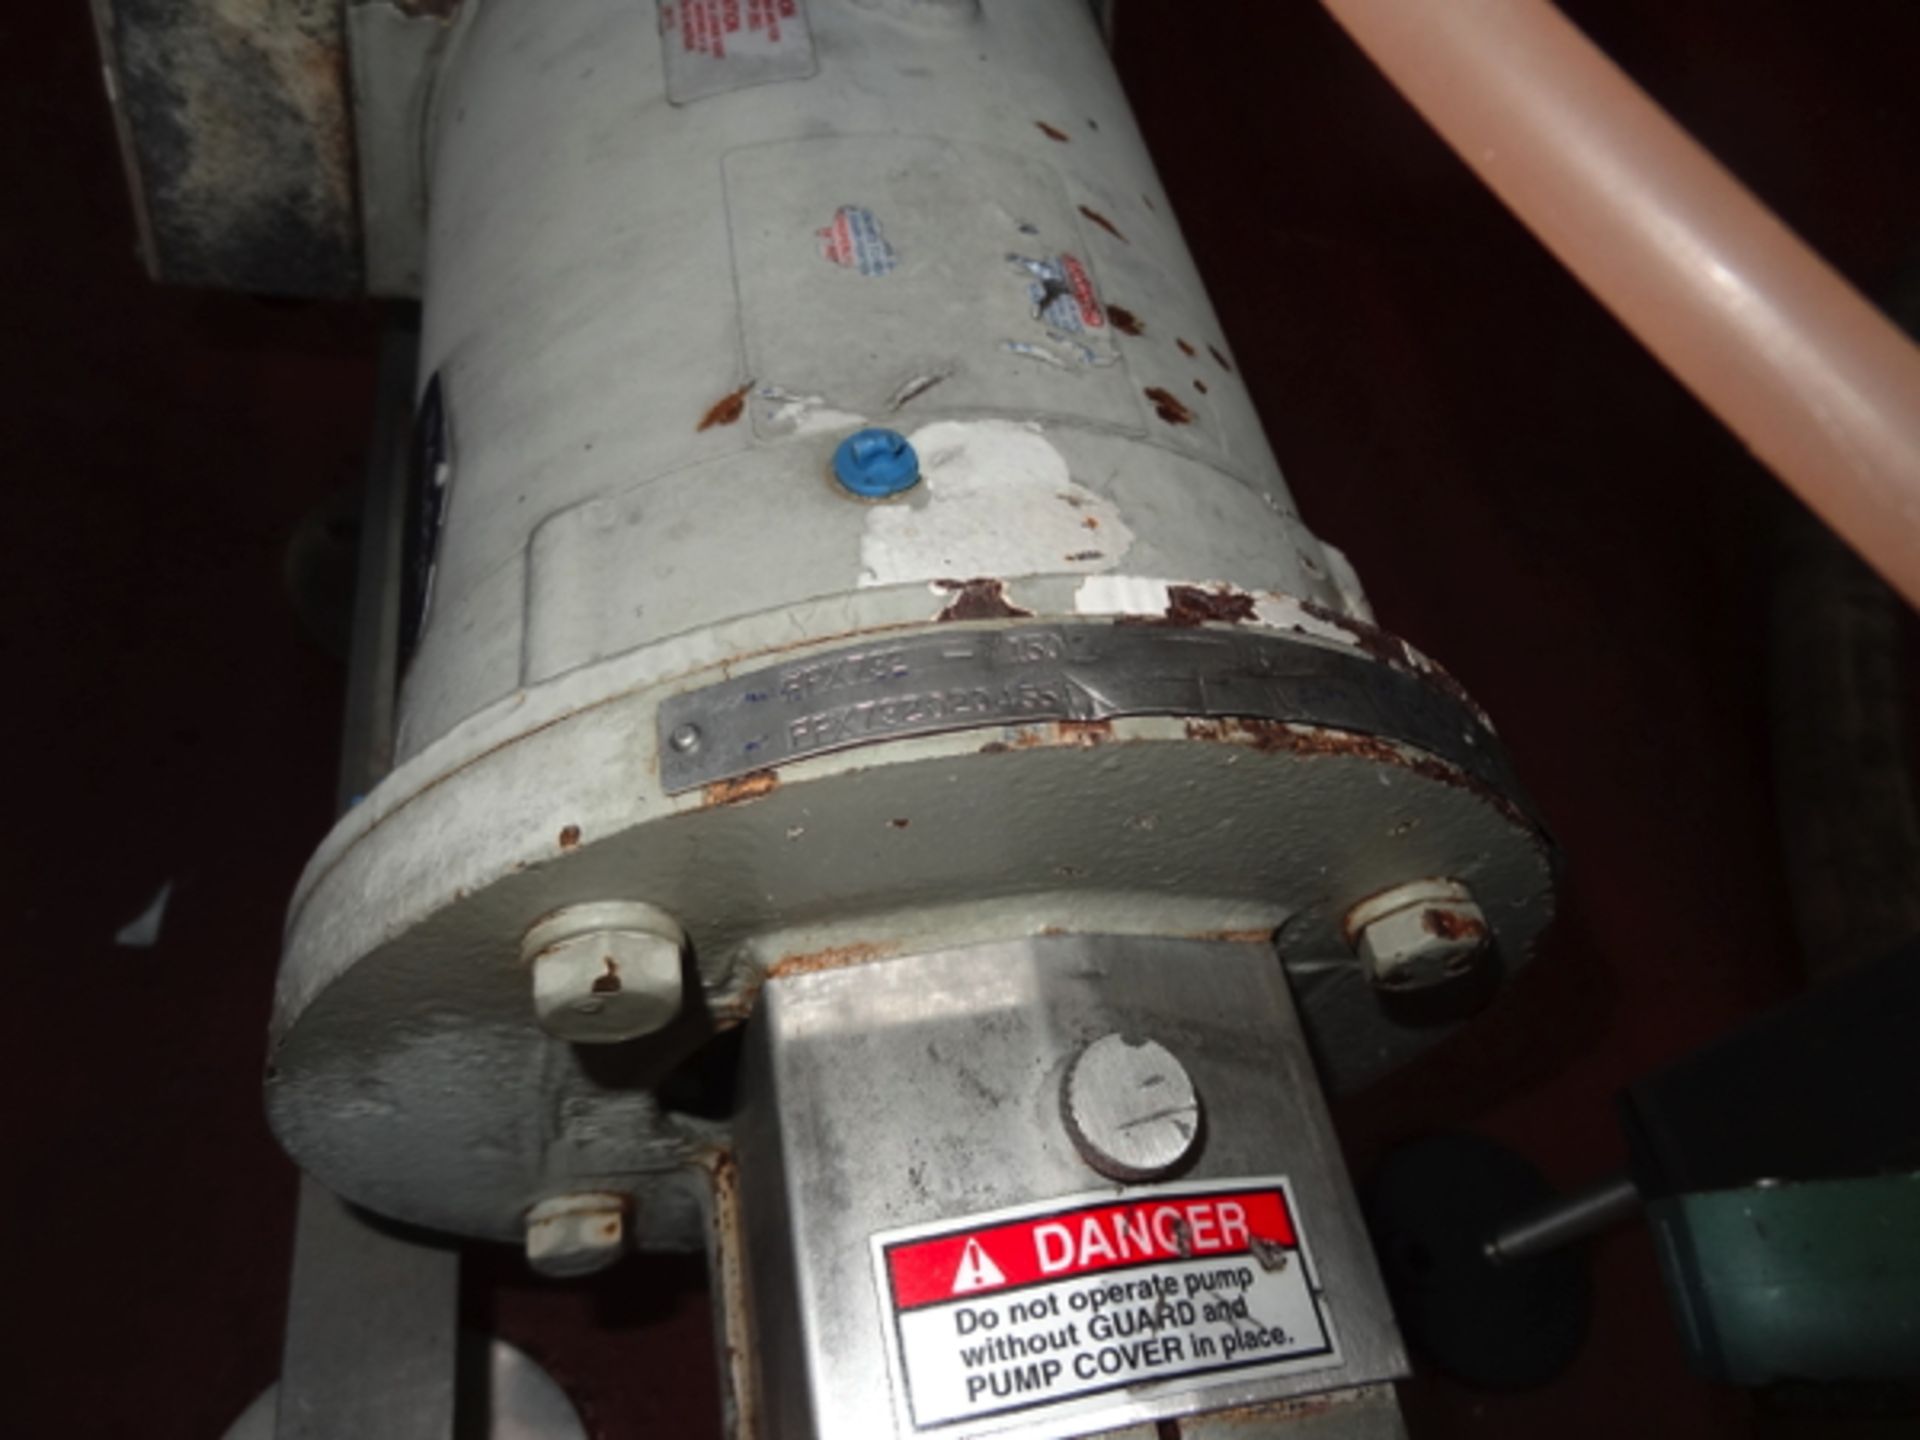 Fristam Sanitary Centrifugal Pump Model FPX732-150, 7.5hp, 3450 rpm | Rigging Price: $50 - Image 3 of 5